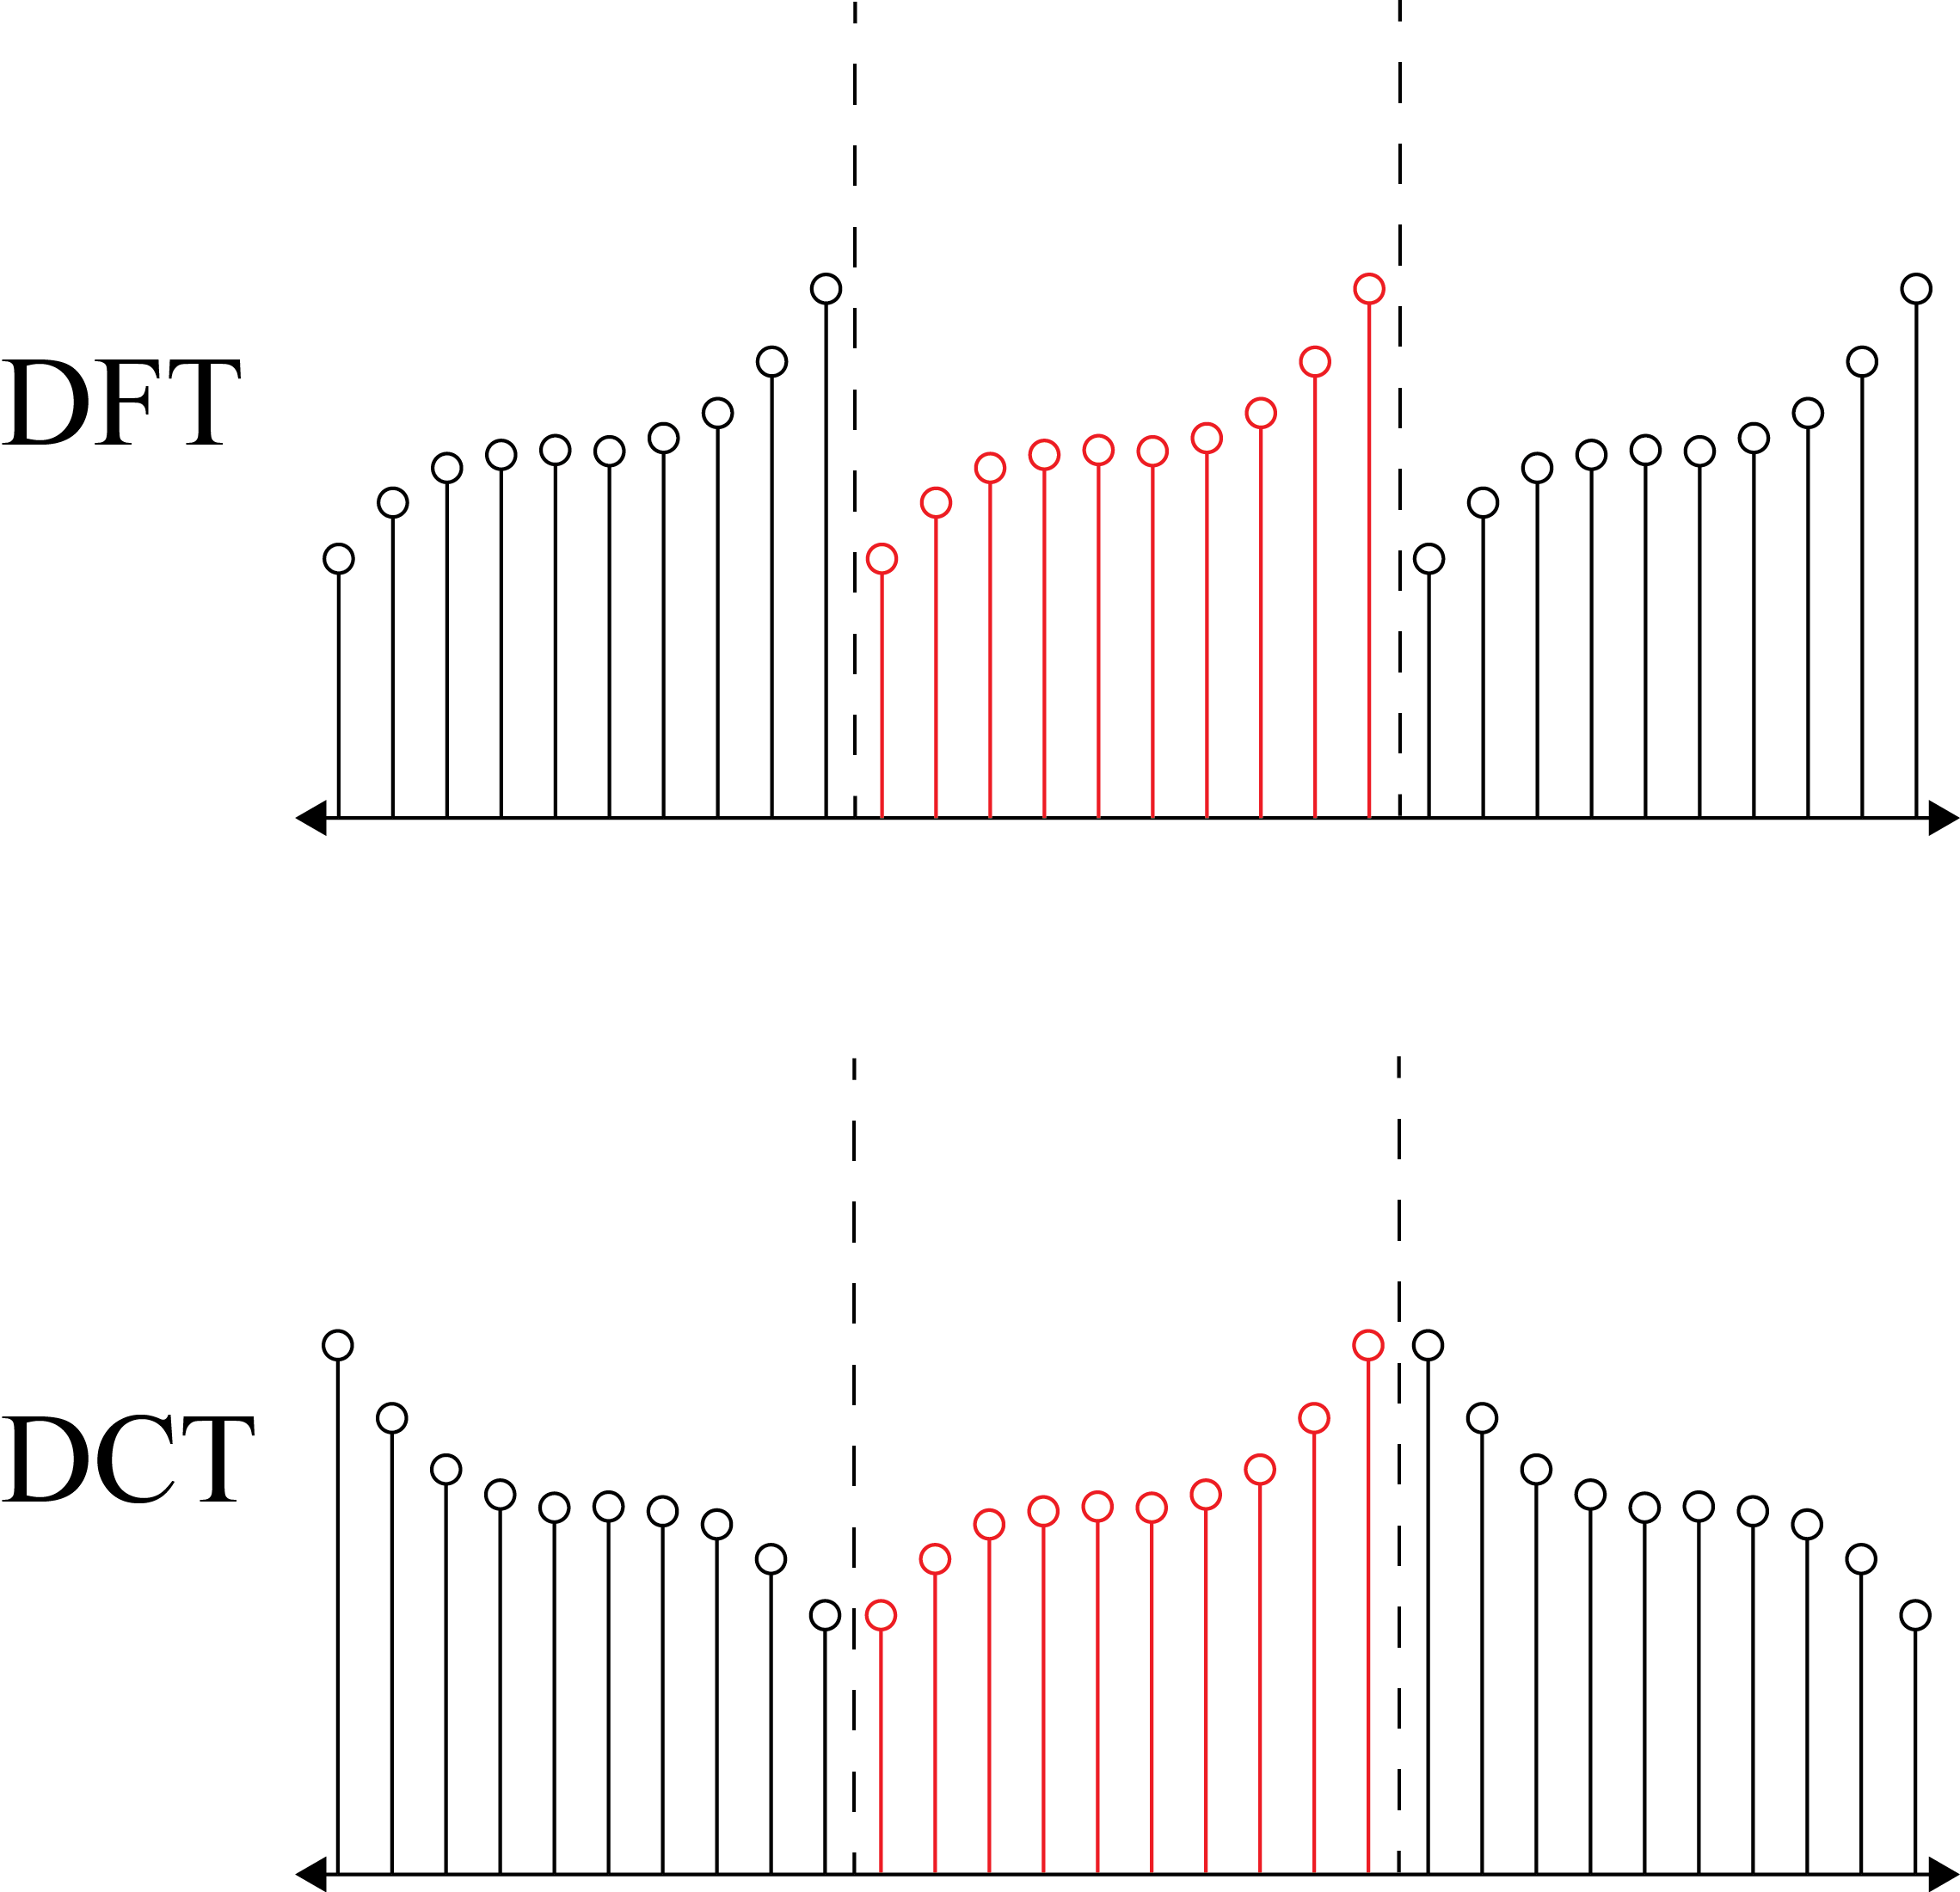 The edge behavior of the DCT.